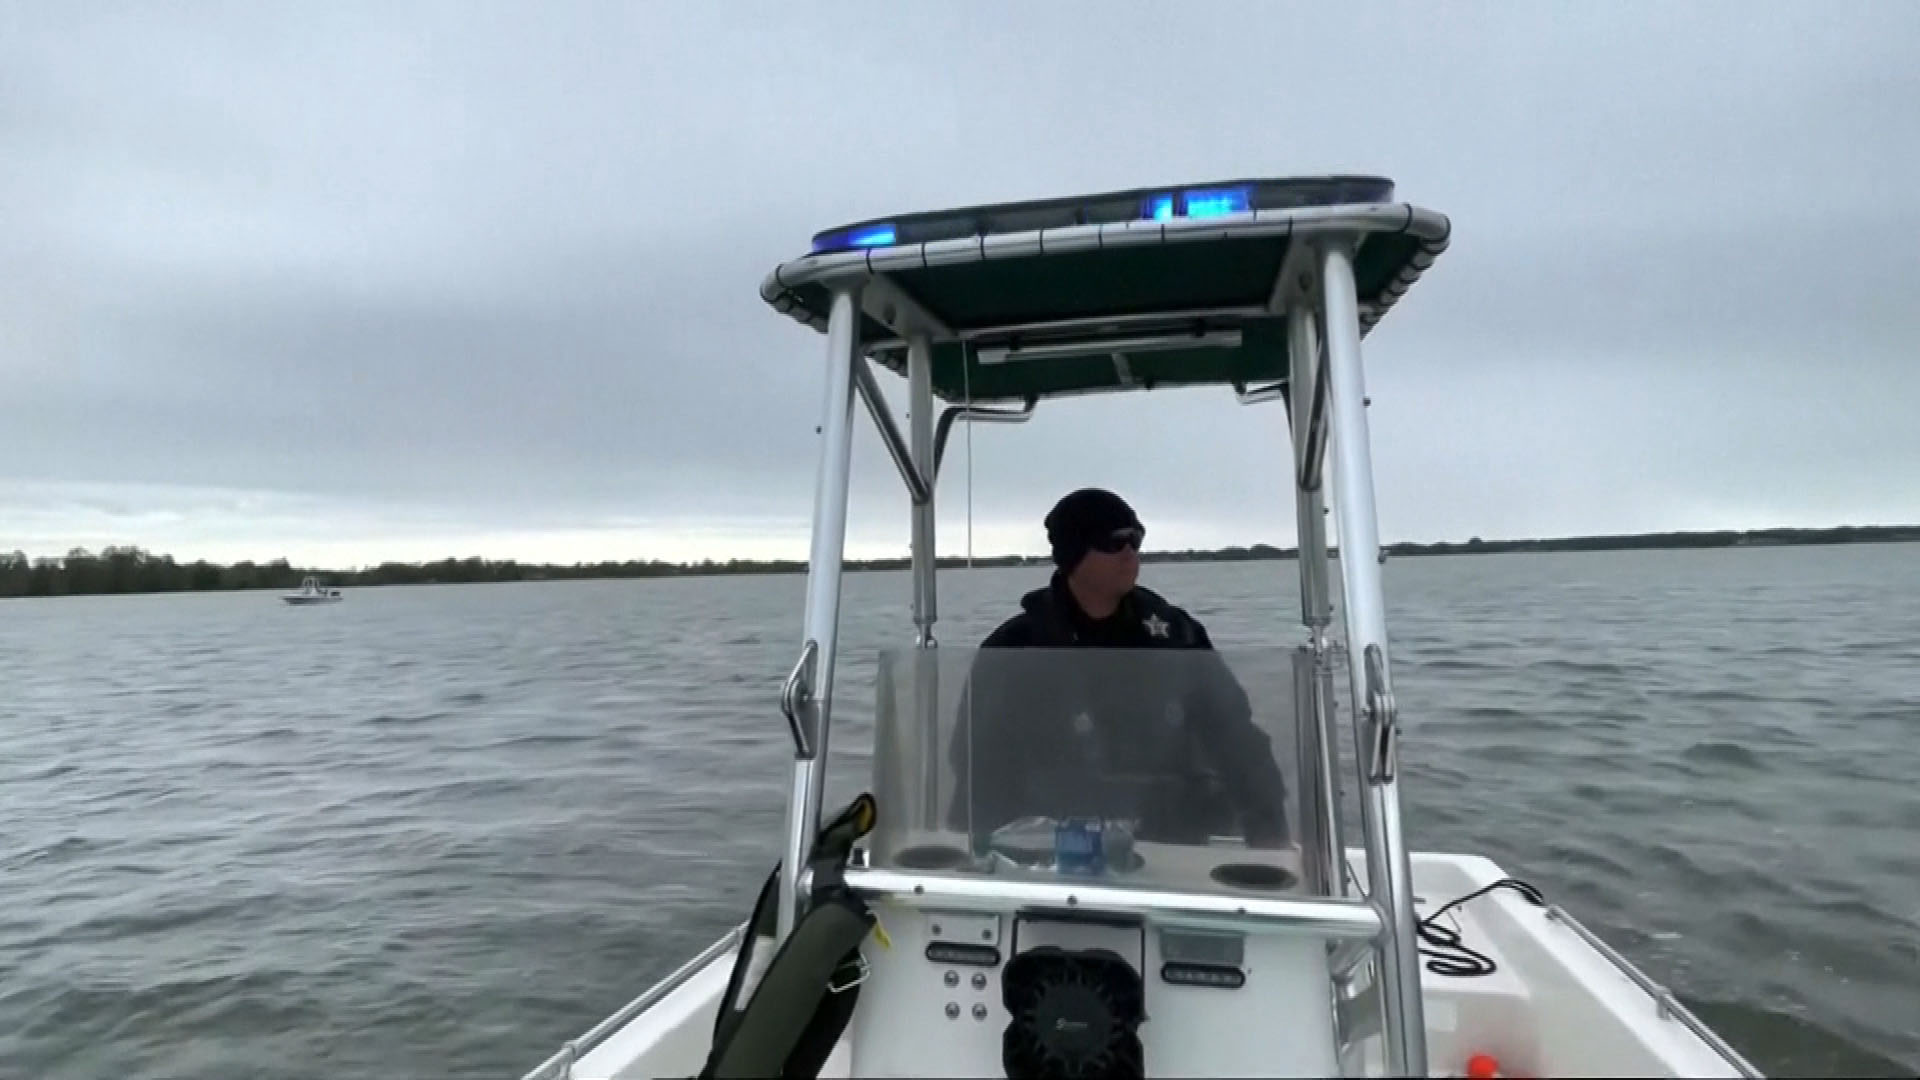 Search for two boaters missing in Florida lake near Legoland